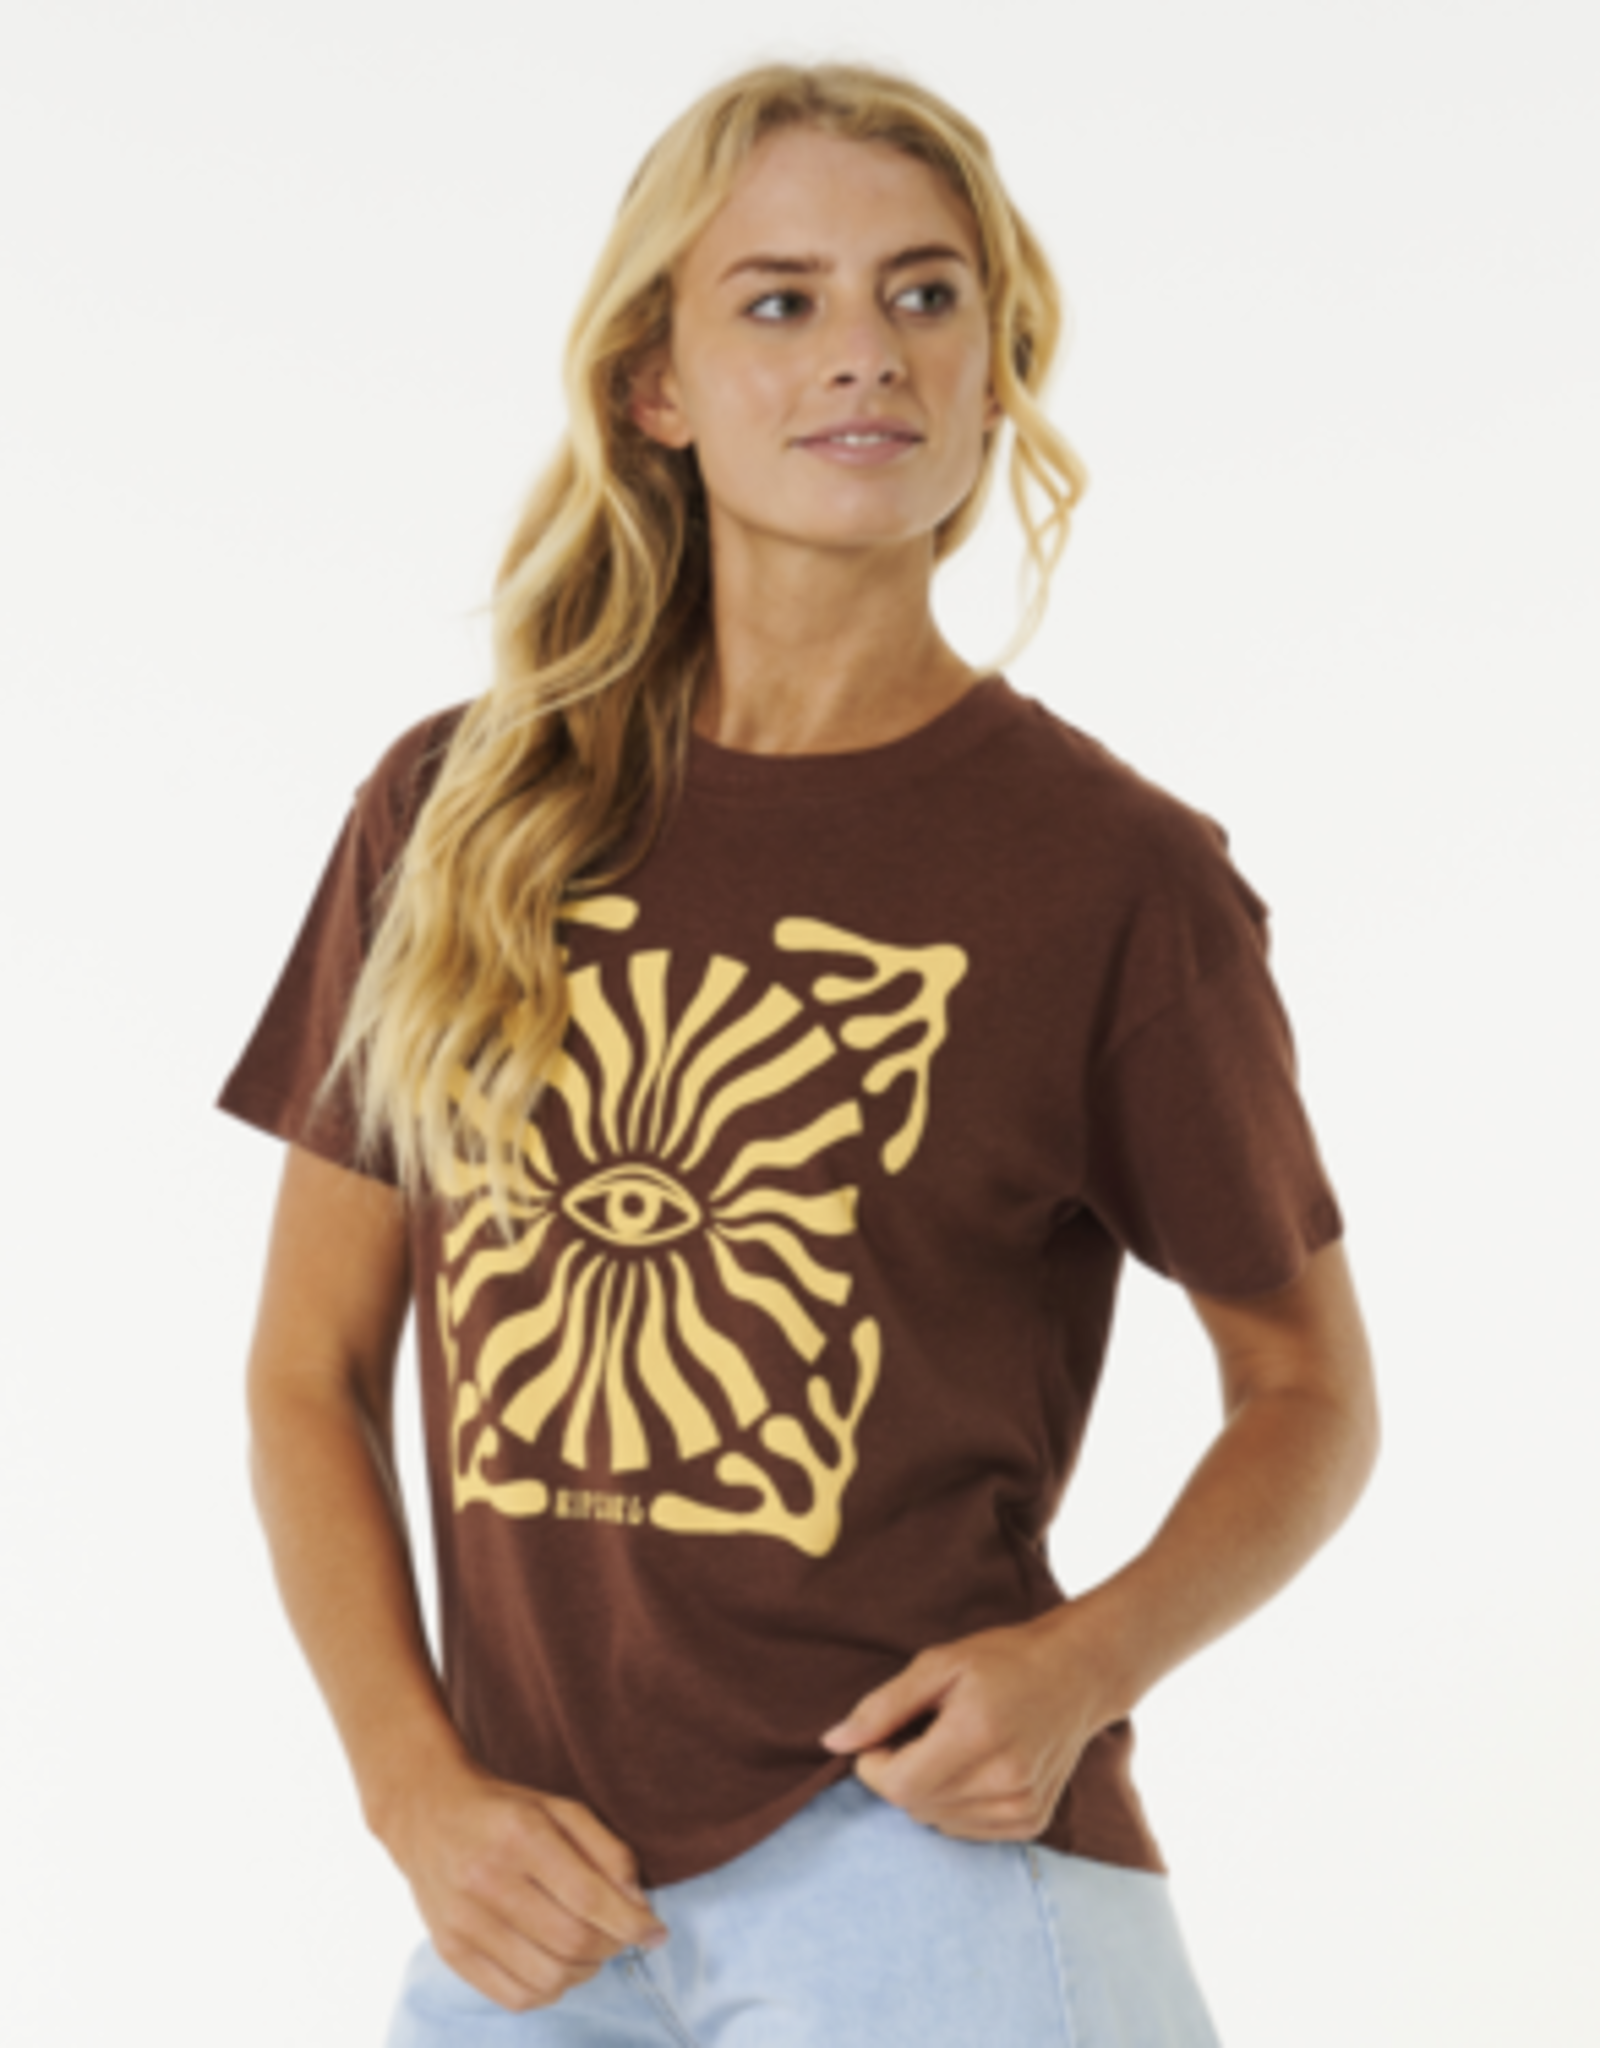 RIPCURL MINDS EYE RELAXED TEE